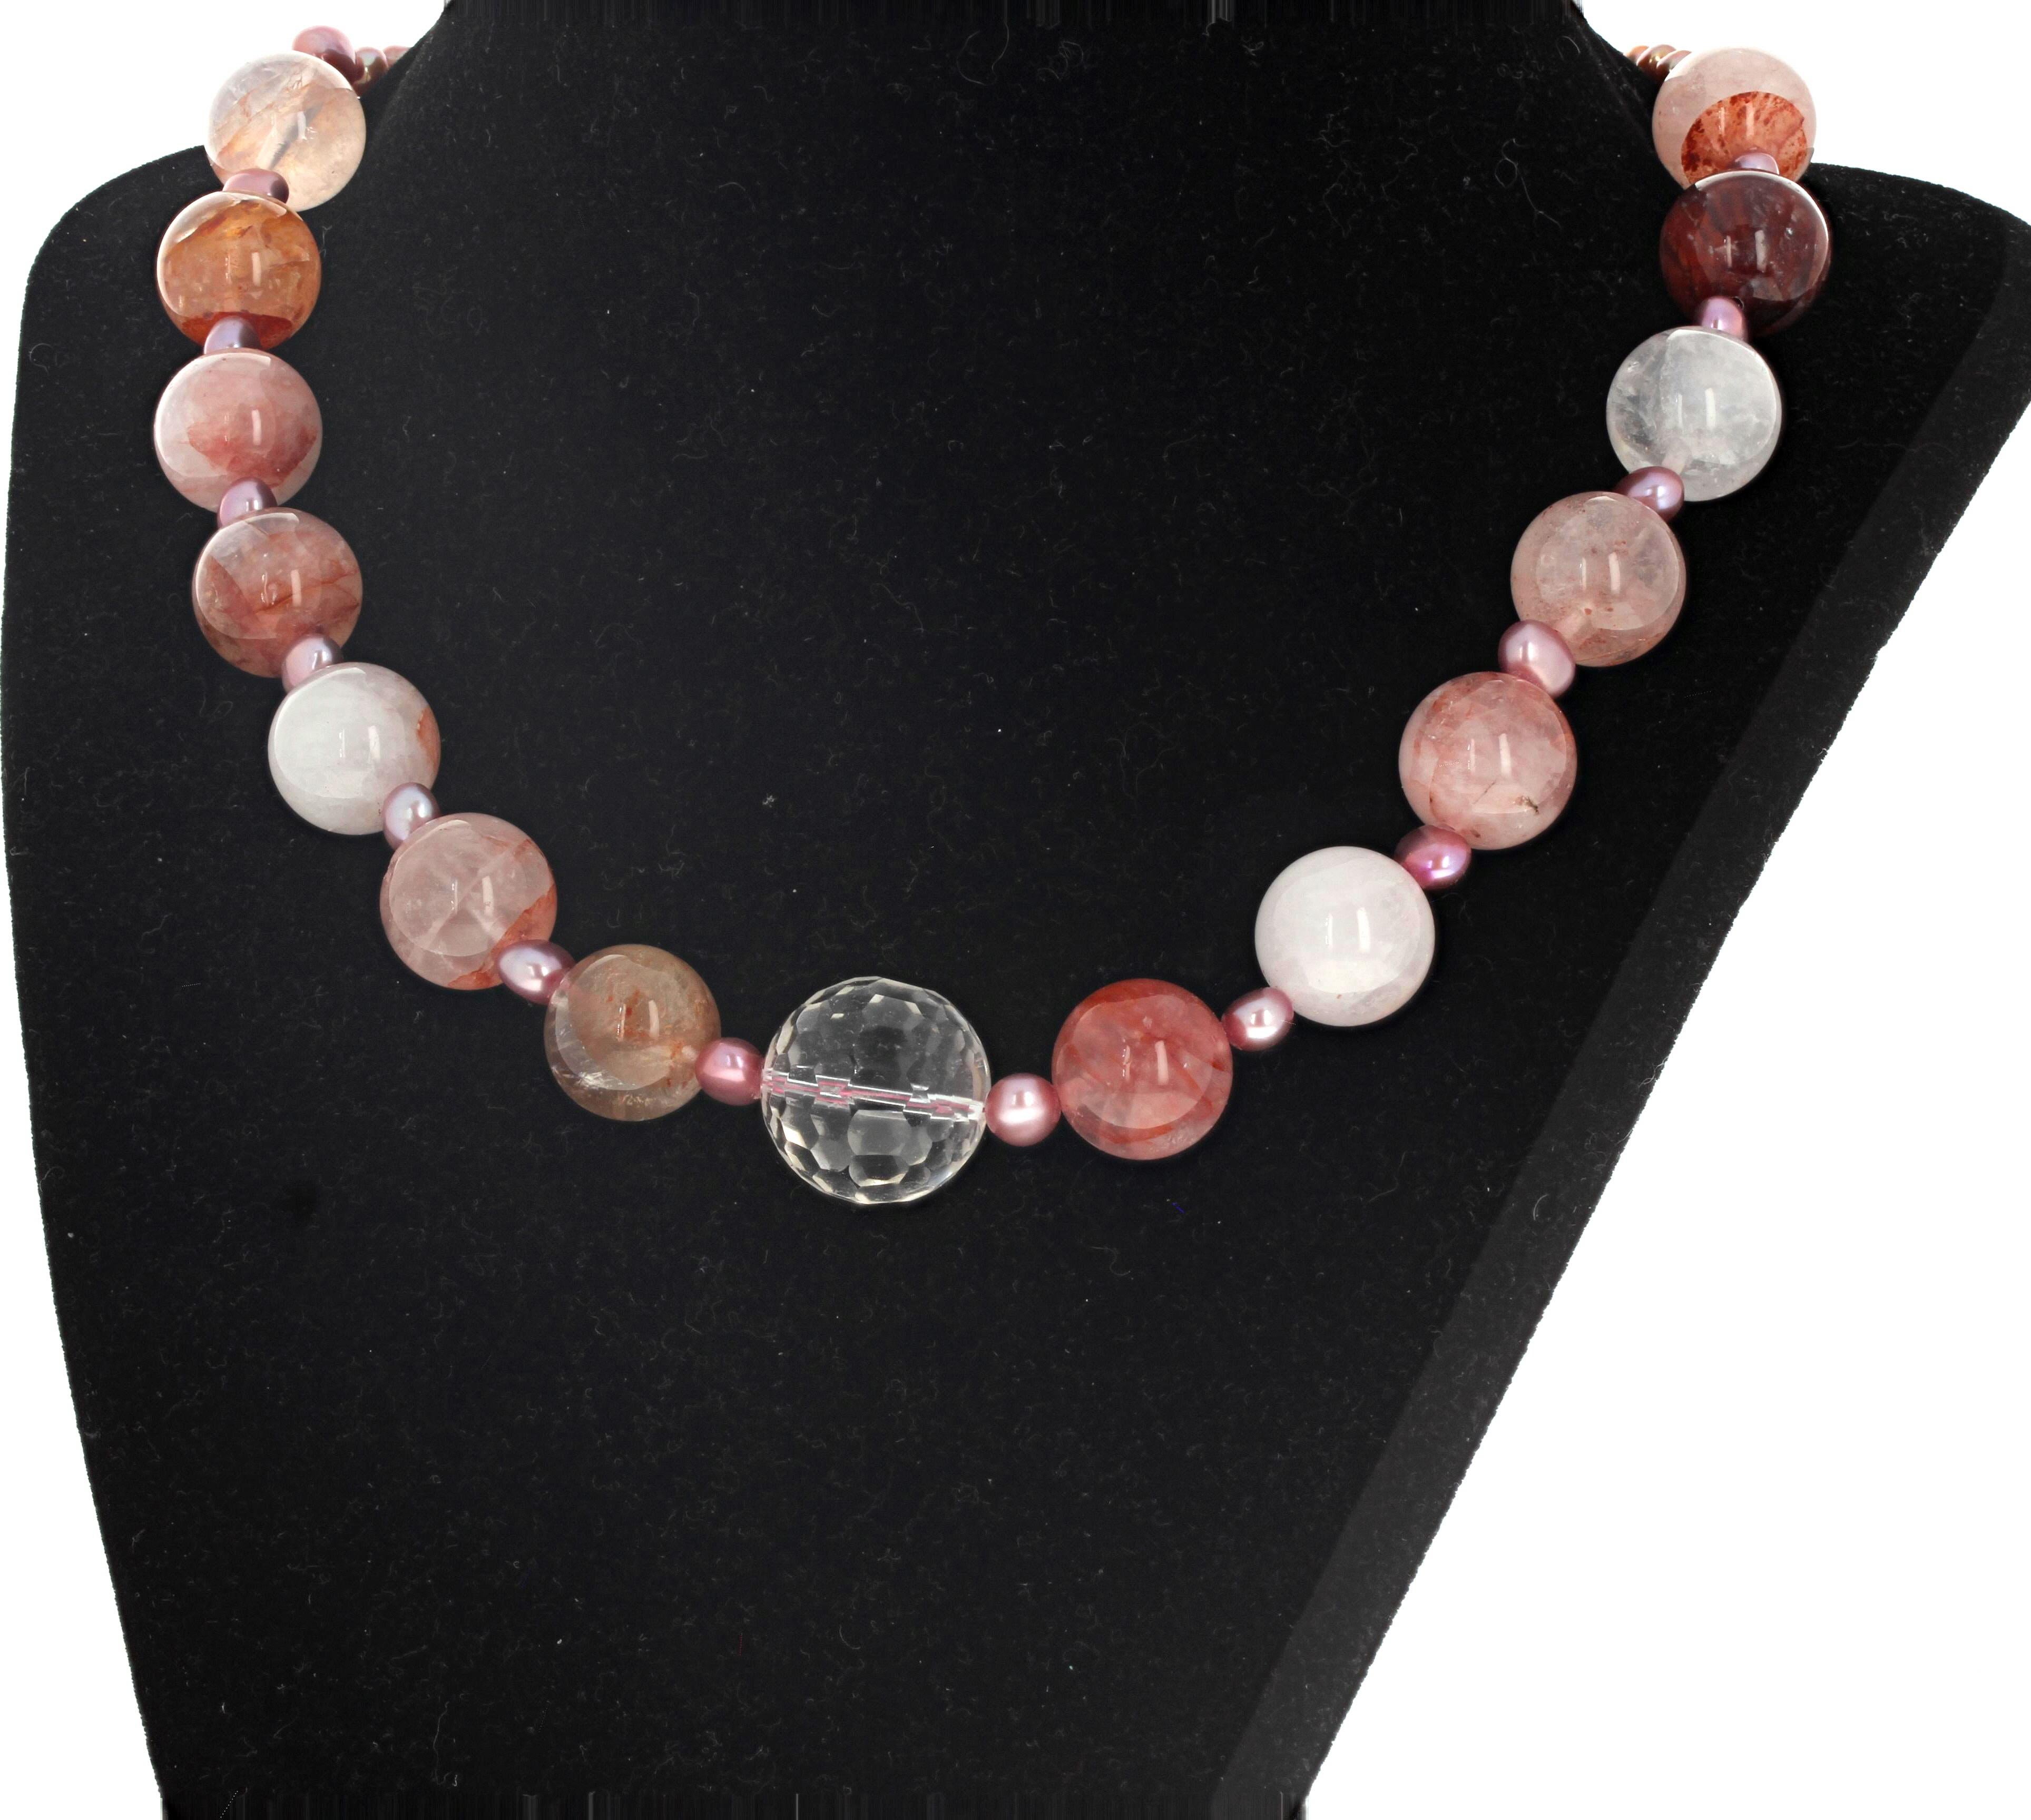 These natural artistic dramatic Strawberry Quartz ( largest is 18mm round) are enhanced with little pink cultured Pearls (8mm) in this wonderful 18 inch long necklace.  The clasp is an easy to use silver clip on clasp.  